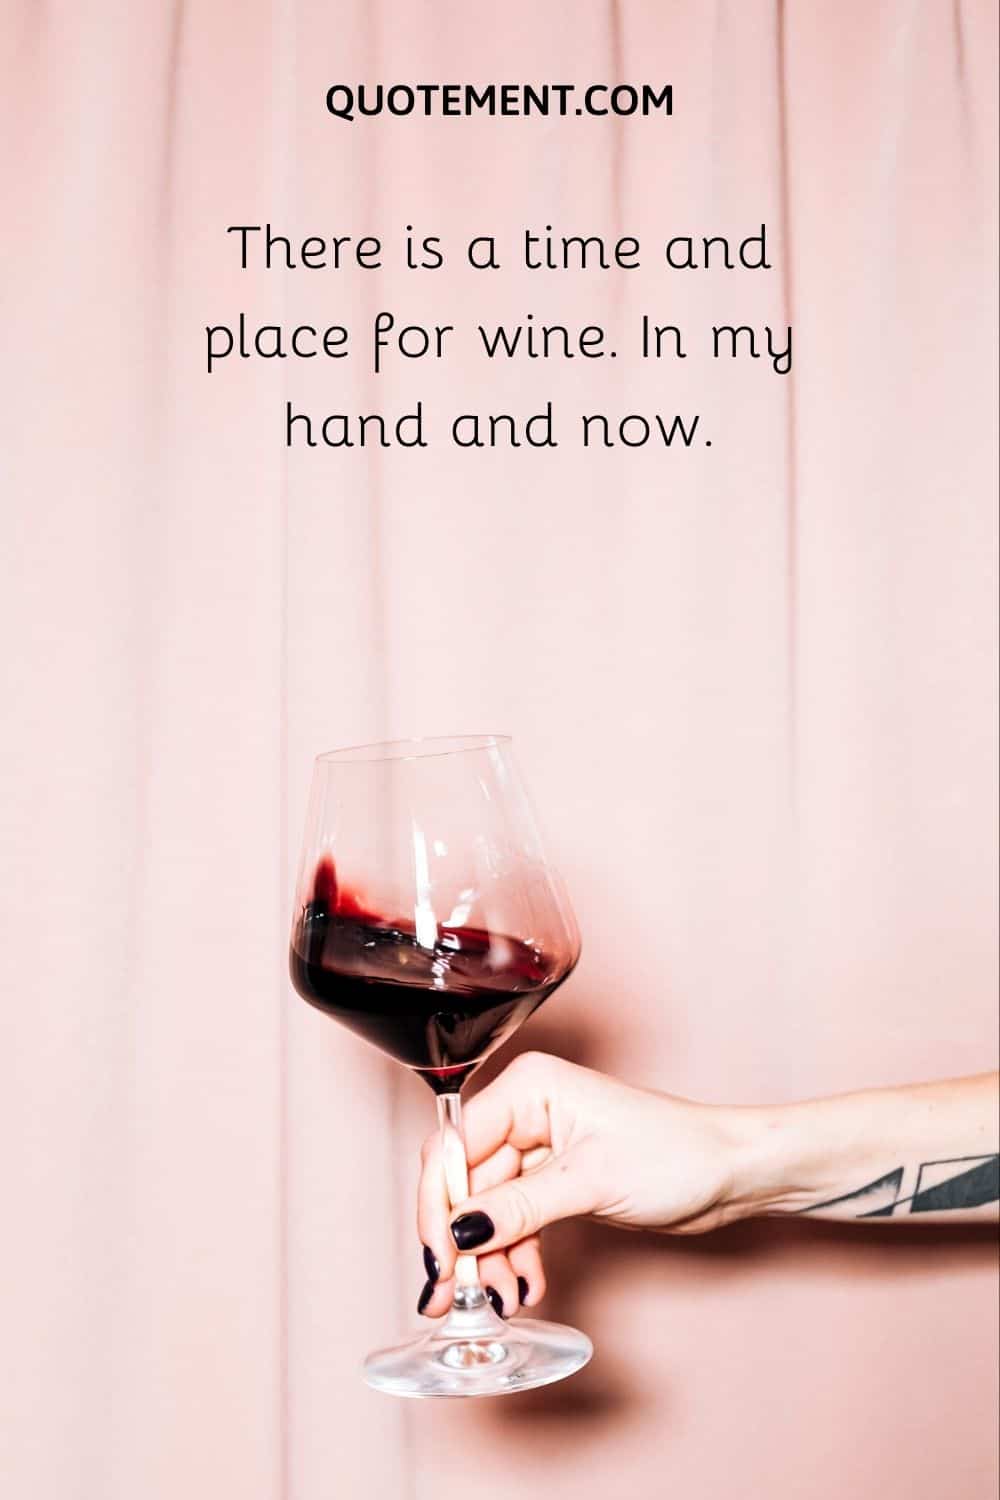 There is a time and place for wine